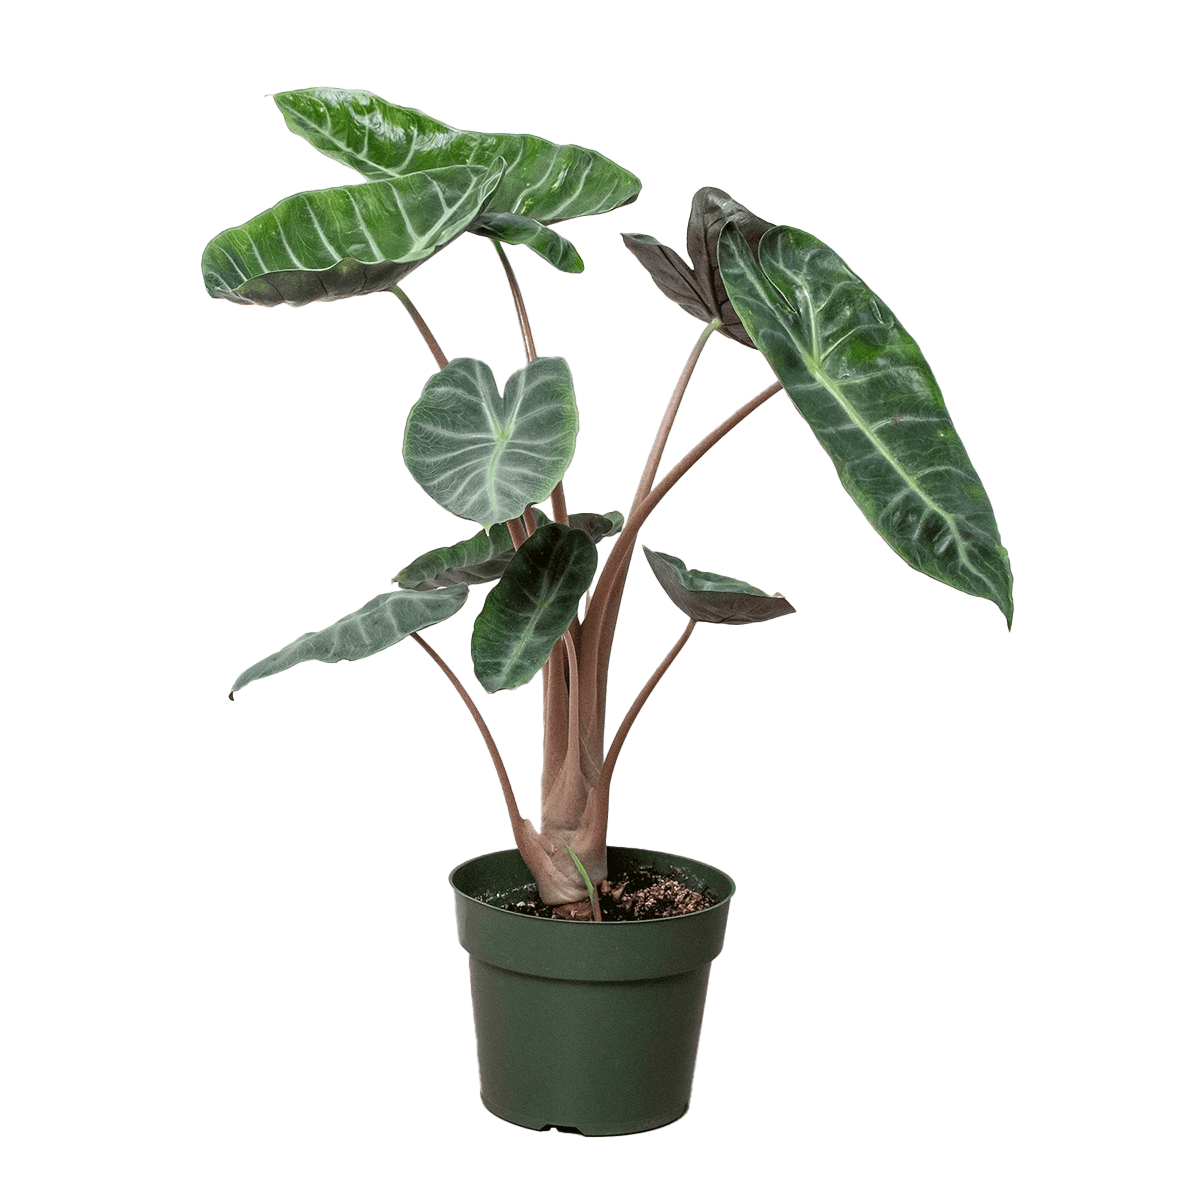 Alocasia Pink Dragon also known as Alocasia morocco pink dragon or Alocasia calidora House Plants for Sale - 6in Nursery Pot | Best Indoor Plants & Houseplant Sale | Forget Me Not Flower Market